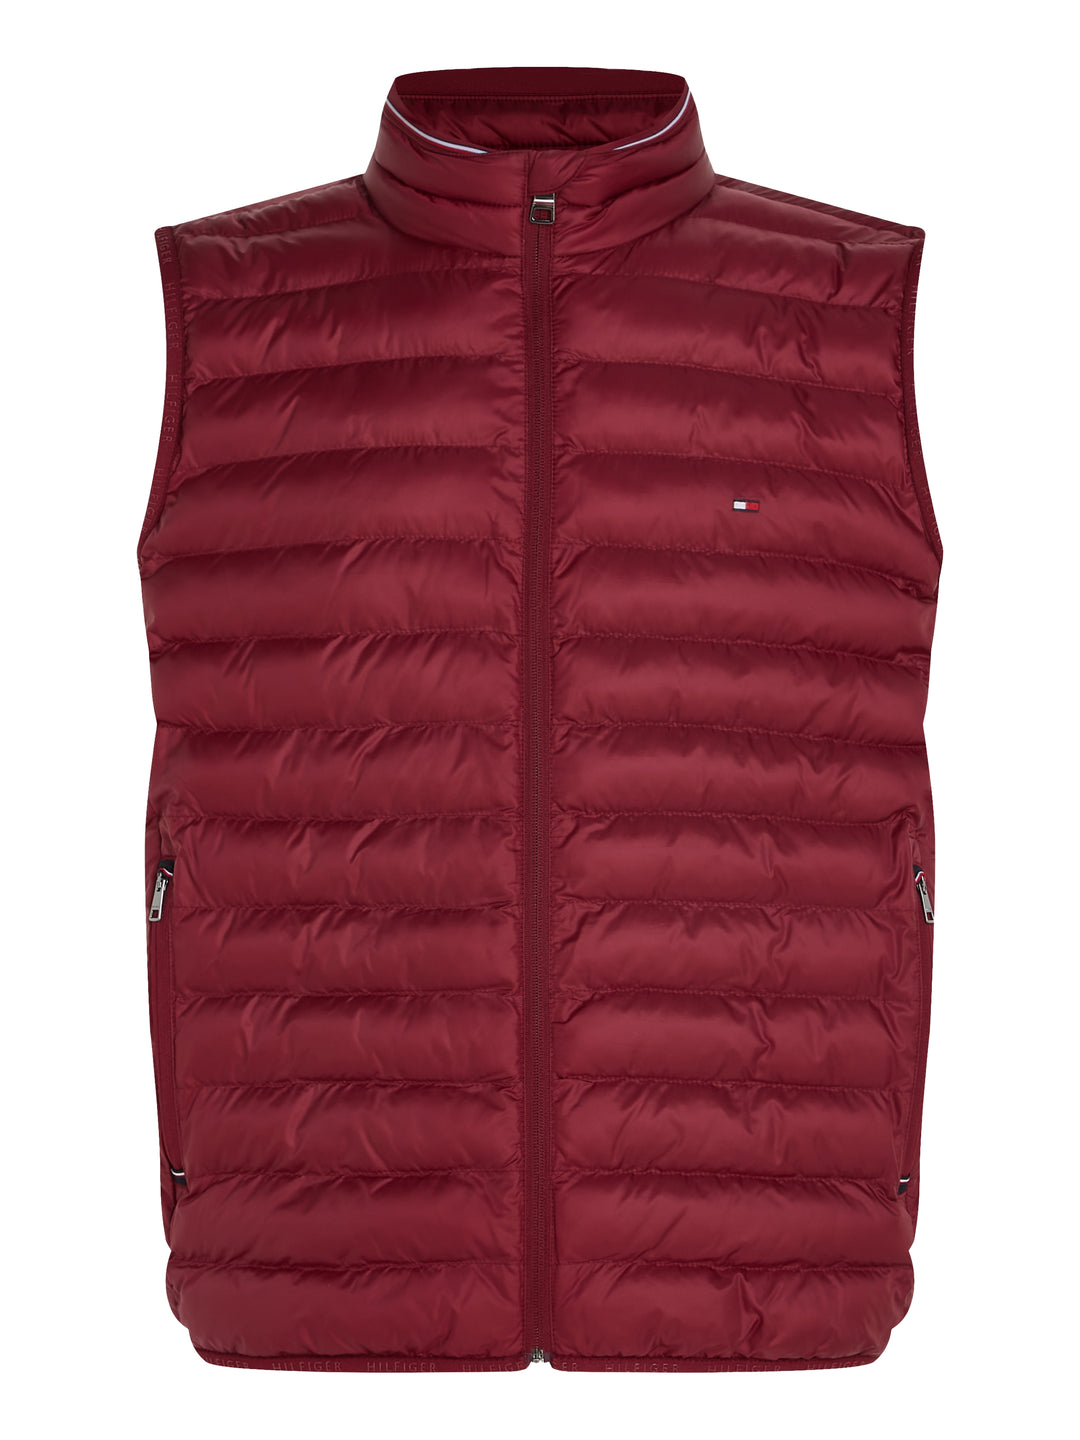 TH PACKABLE RECYCLED VEST - DEEP ROUGE